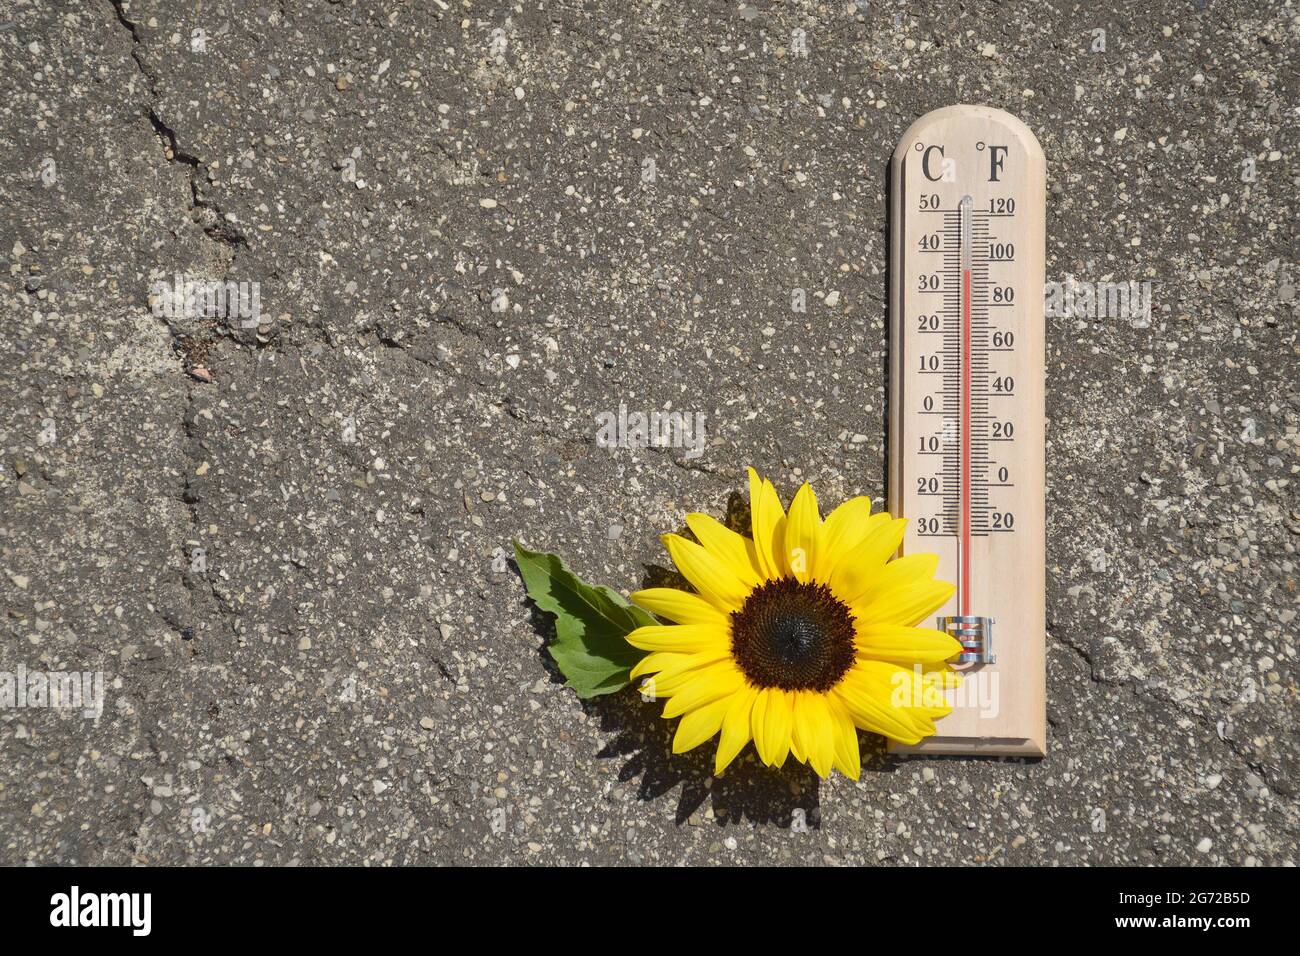 Thermometer on concrete background showing high temperature. Summer heat concept Stock Photo